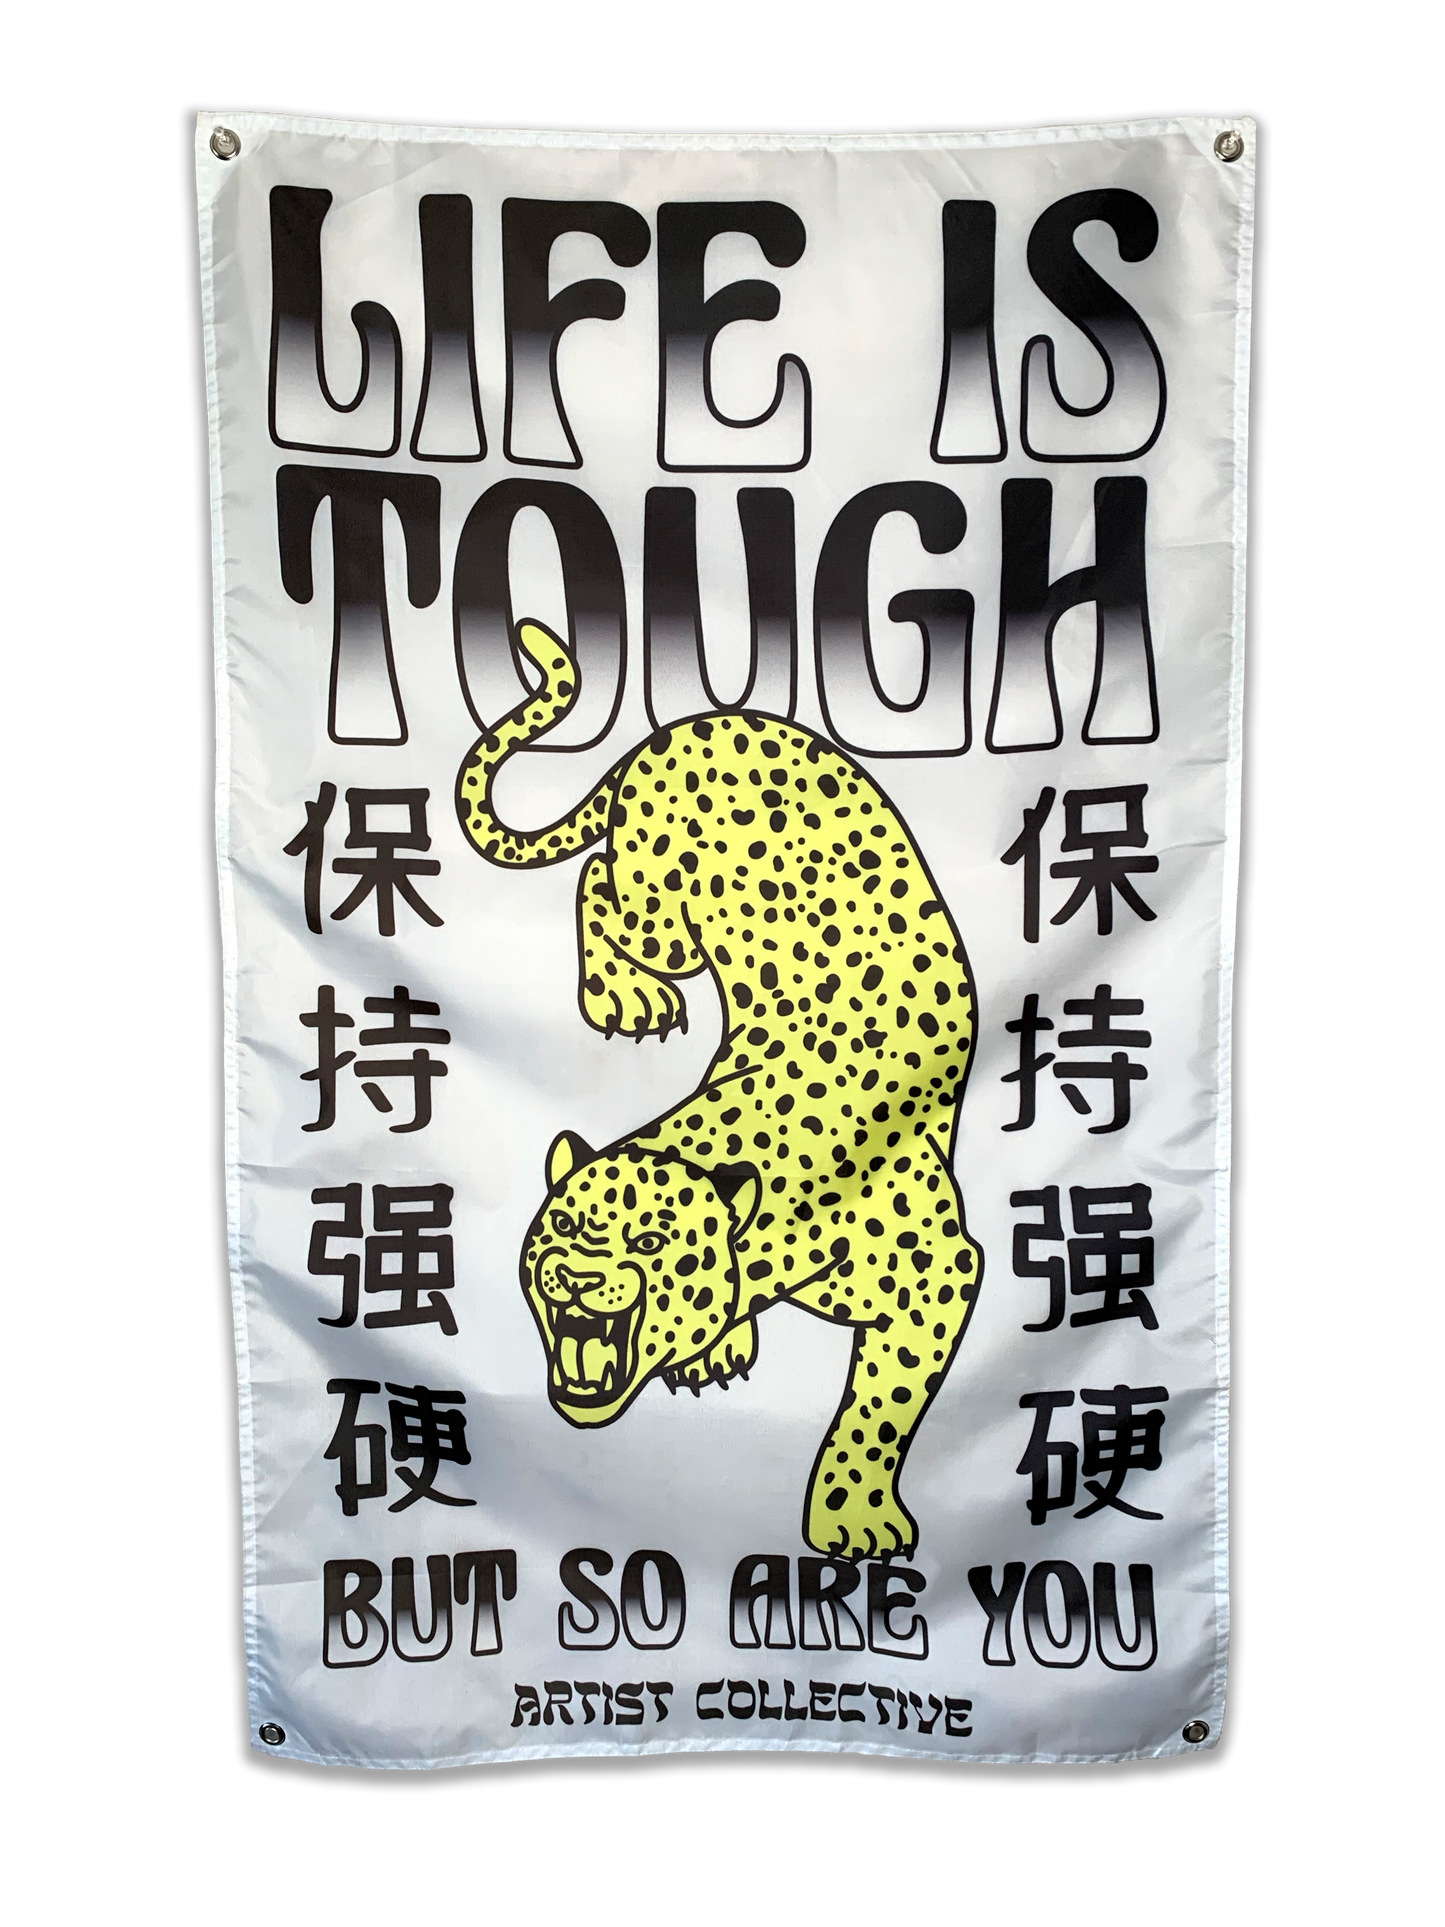 Life is Tough Banner